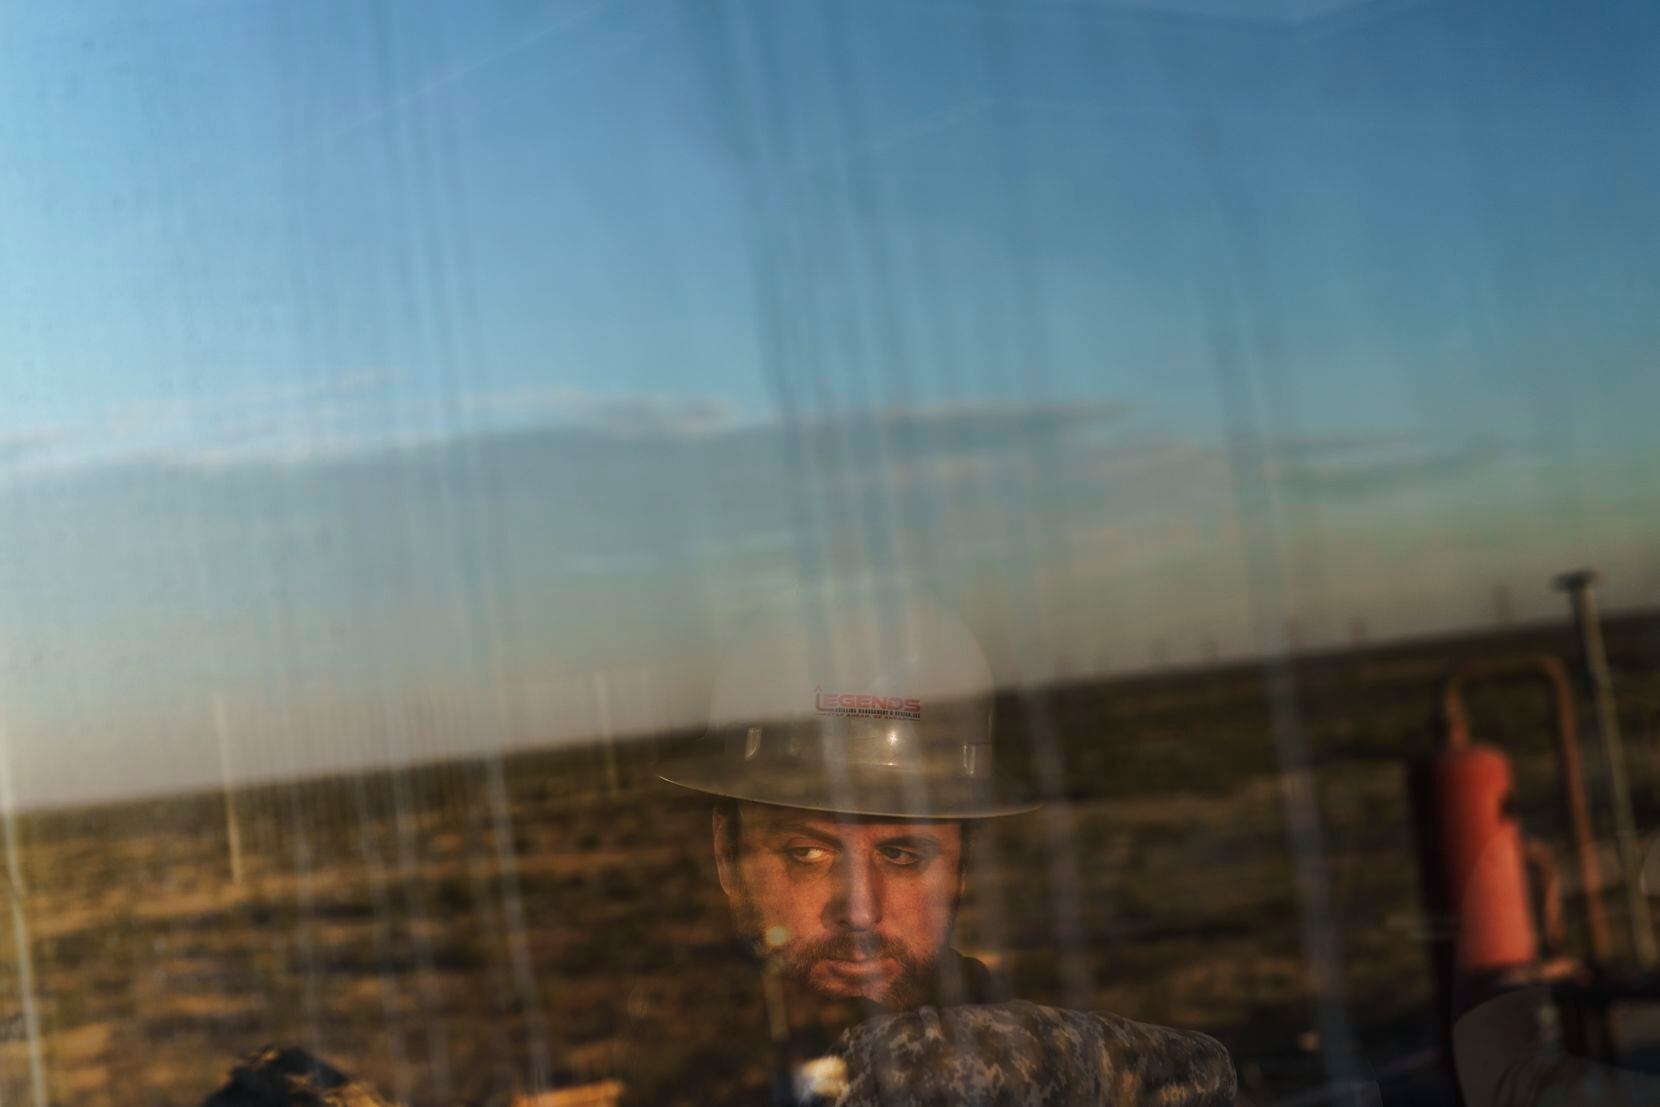 Well site supervisor Jason Brown looks out toward the Permian Basin from the control room of...